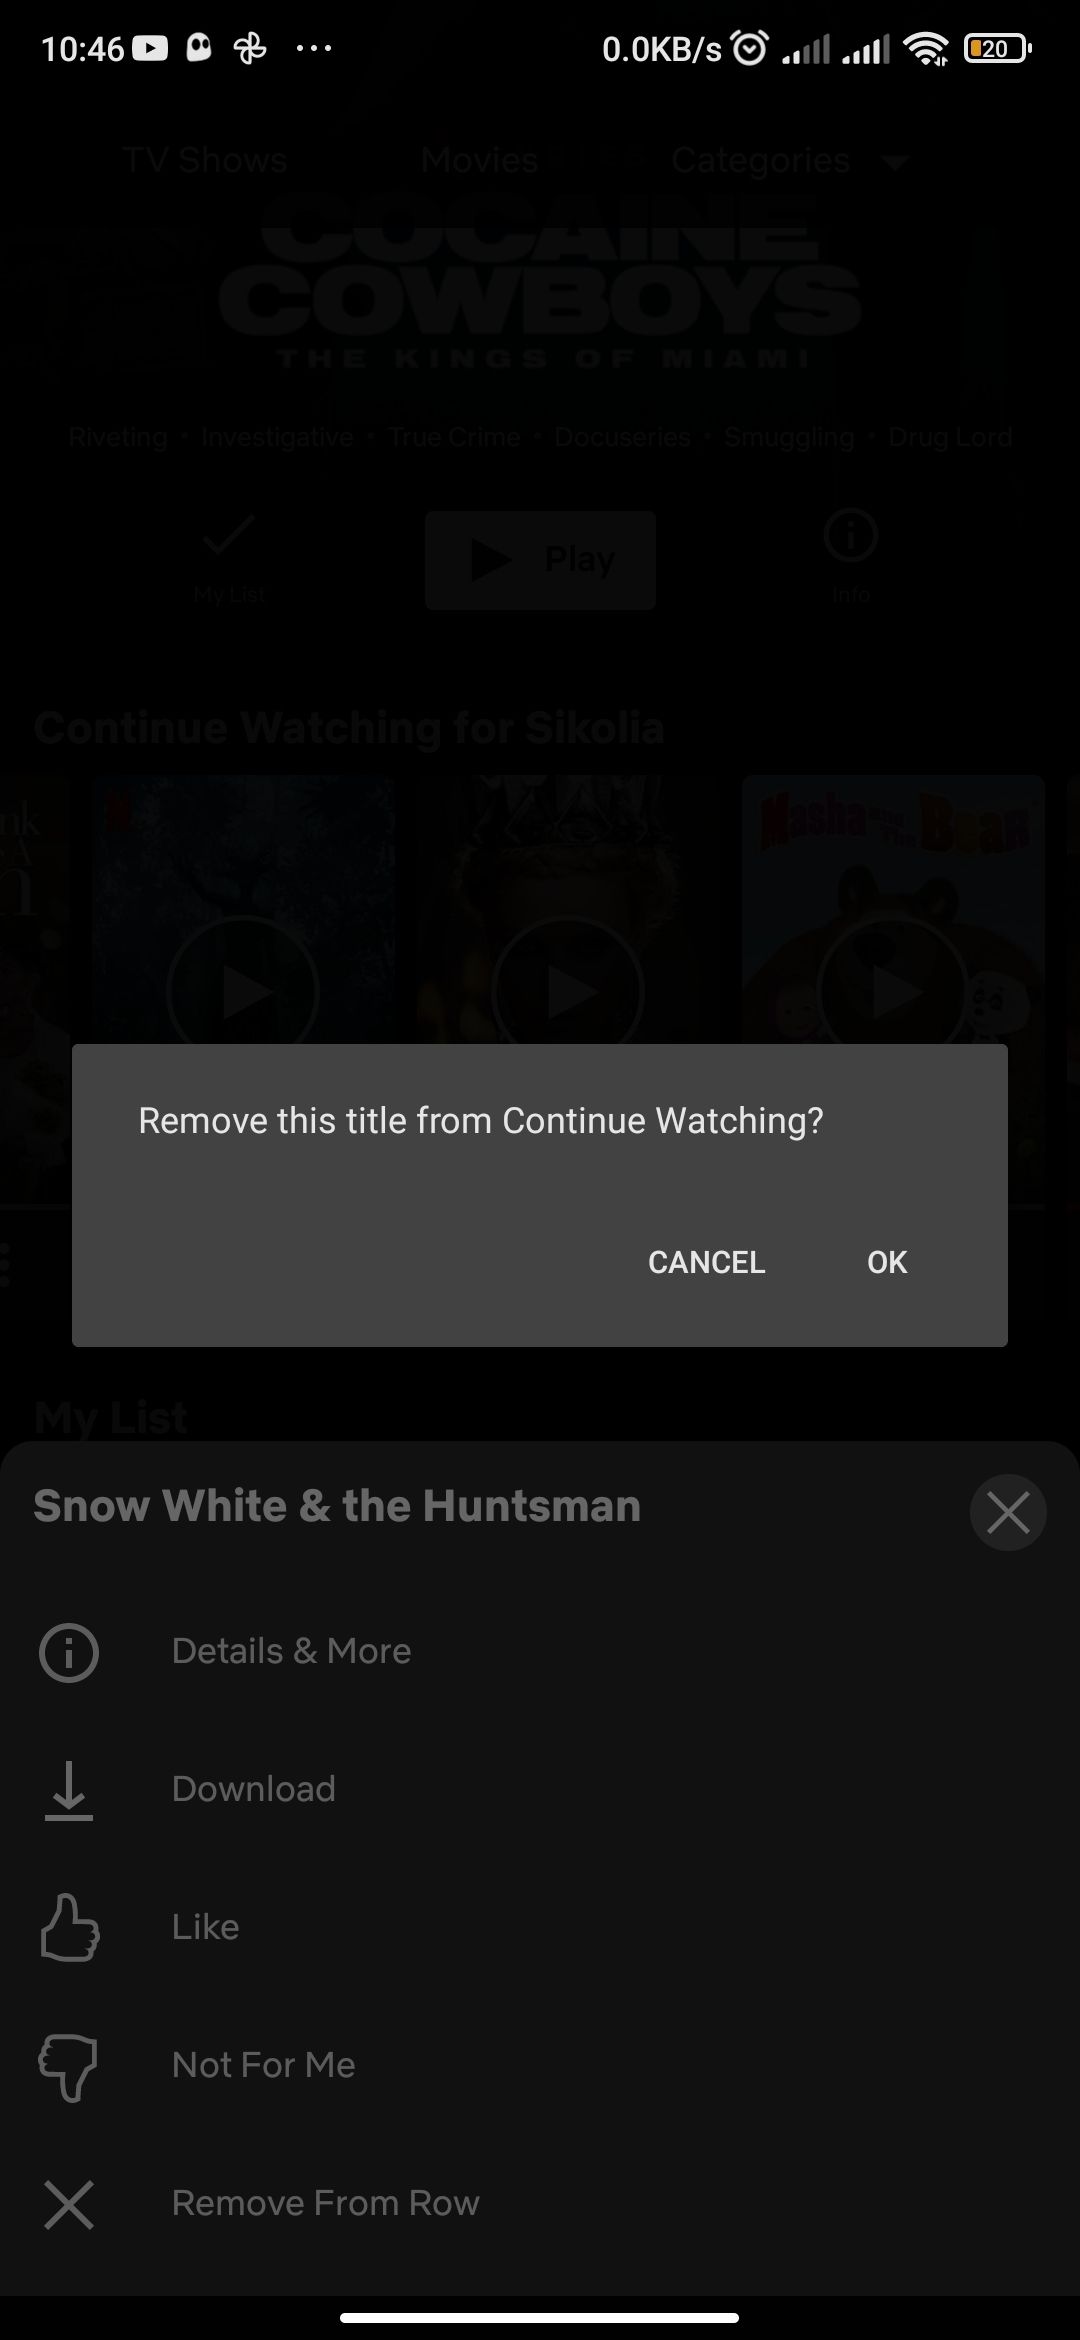 Remove from Continue Watching row confirmation